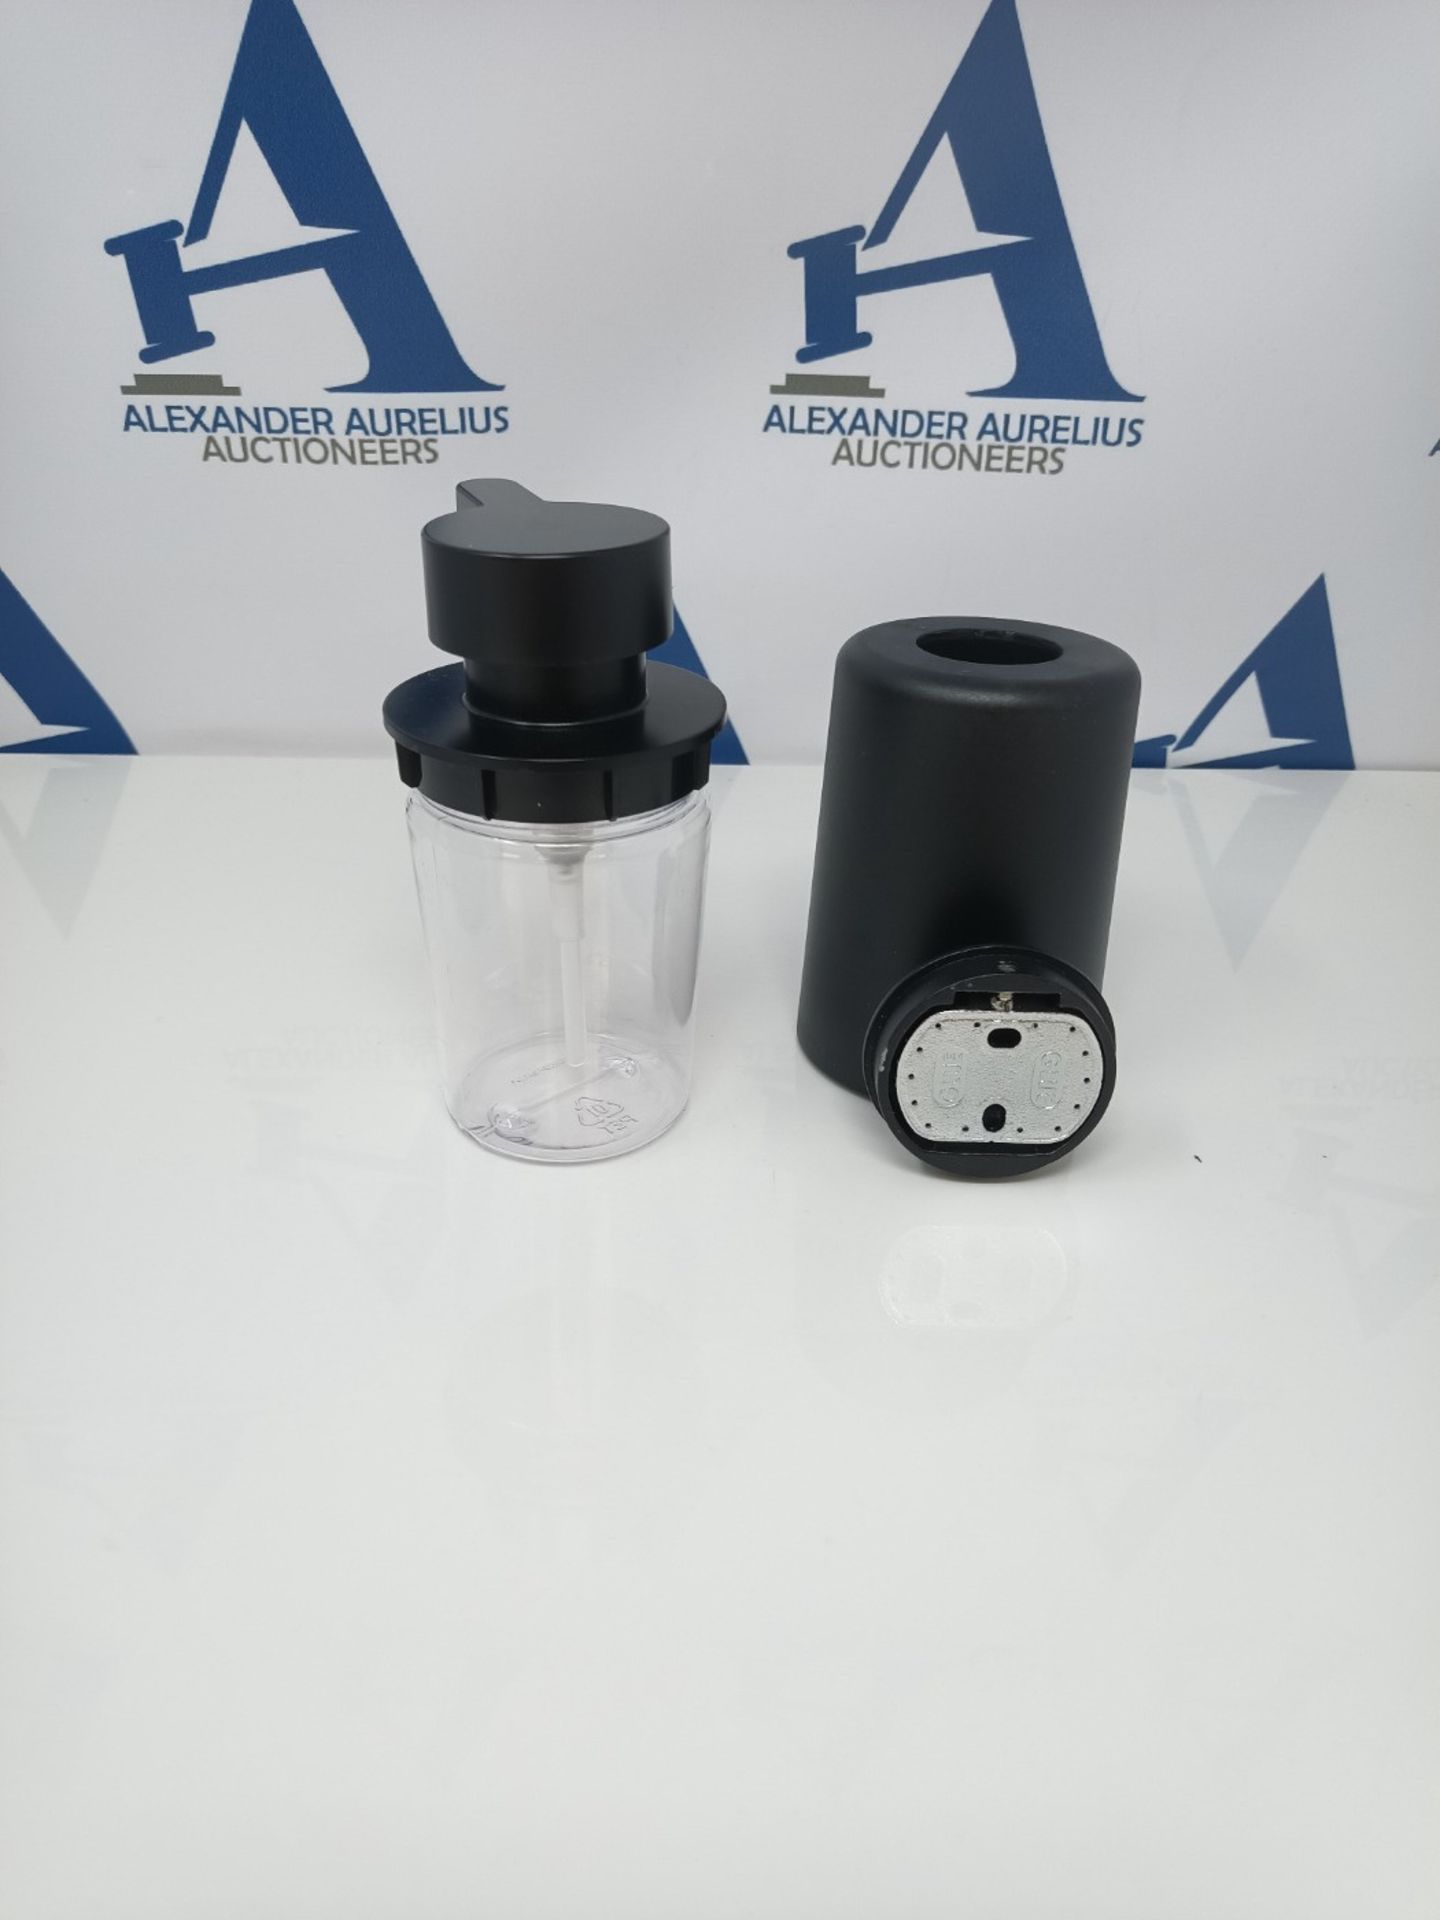 Tiger Colar soap dispenser for gluing, stainless steel, black powder-coated, easy to f - Image 3 of 3